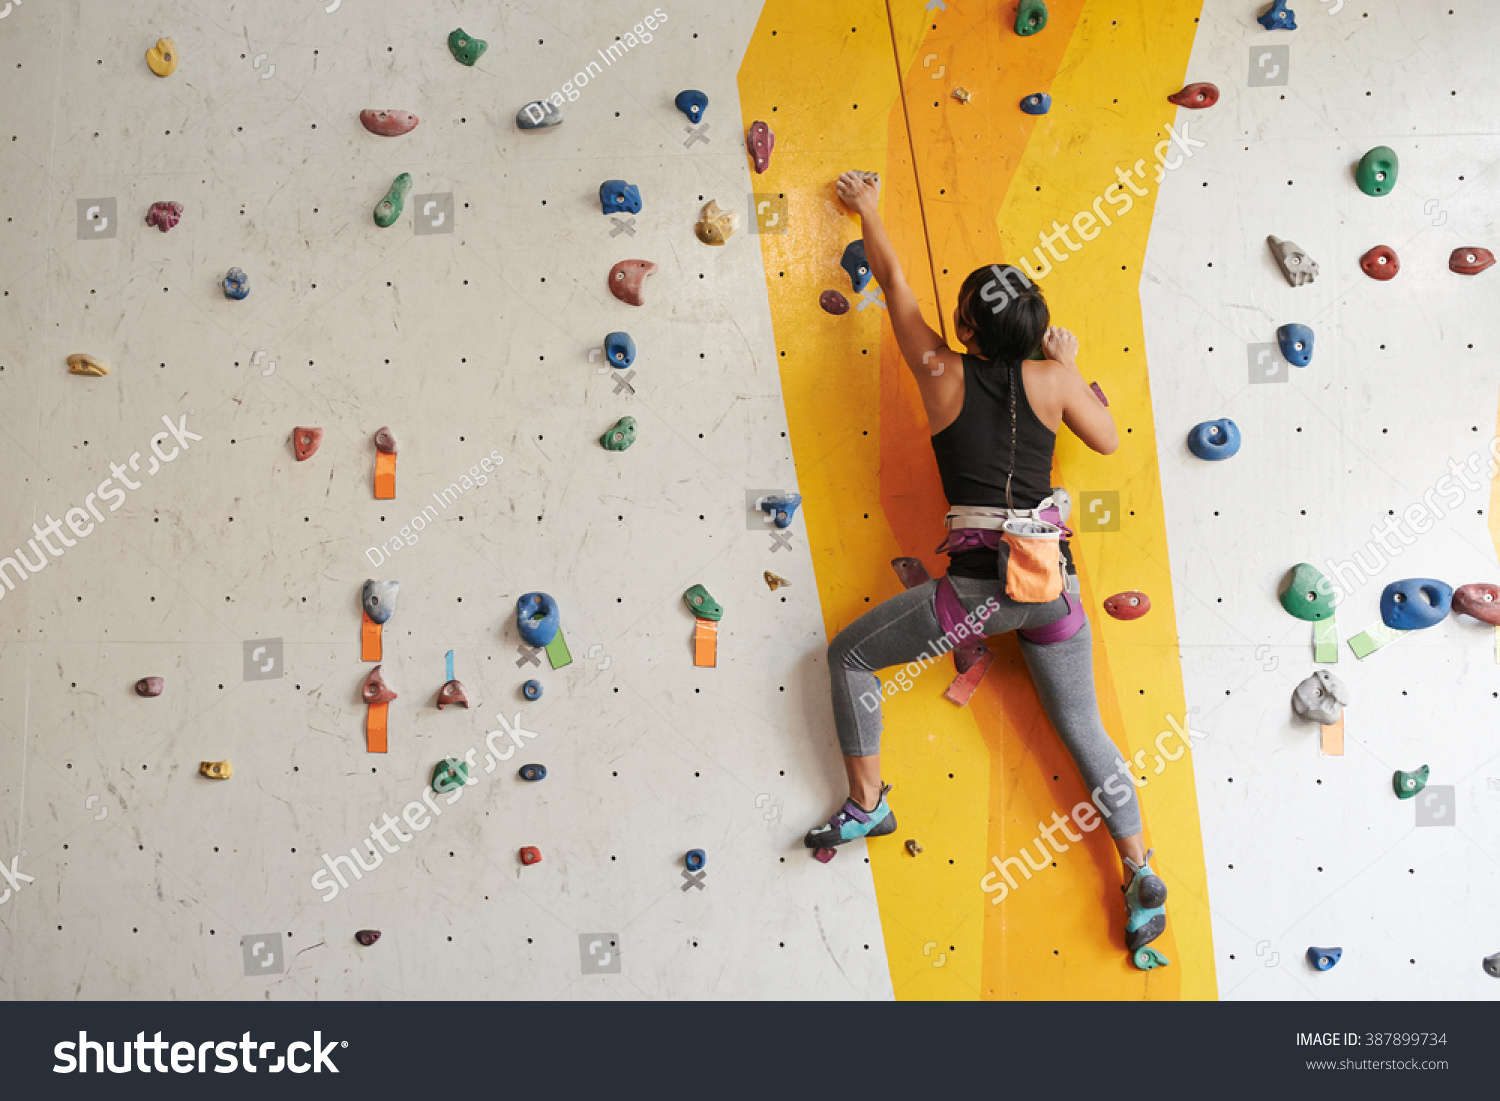 Athletic woman climbing indoors, view from the back #387899734